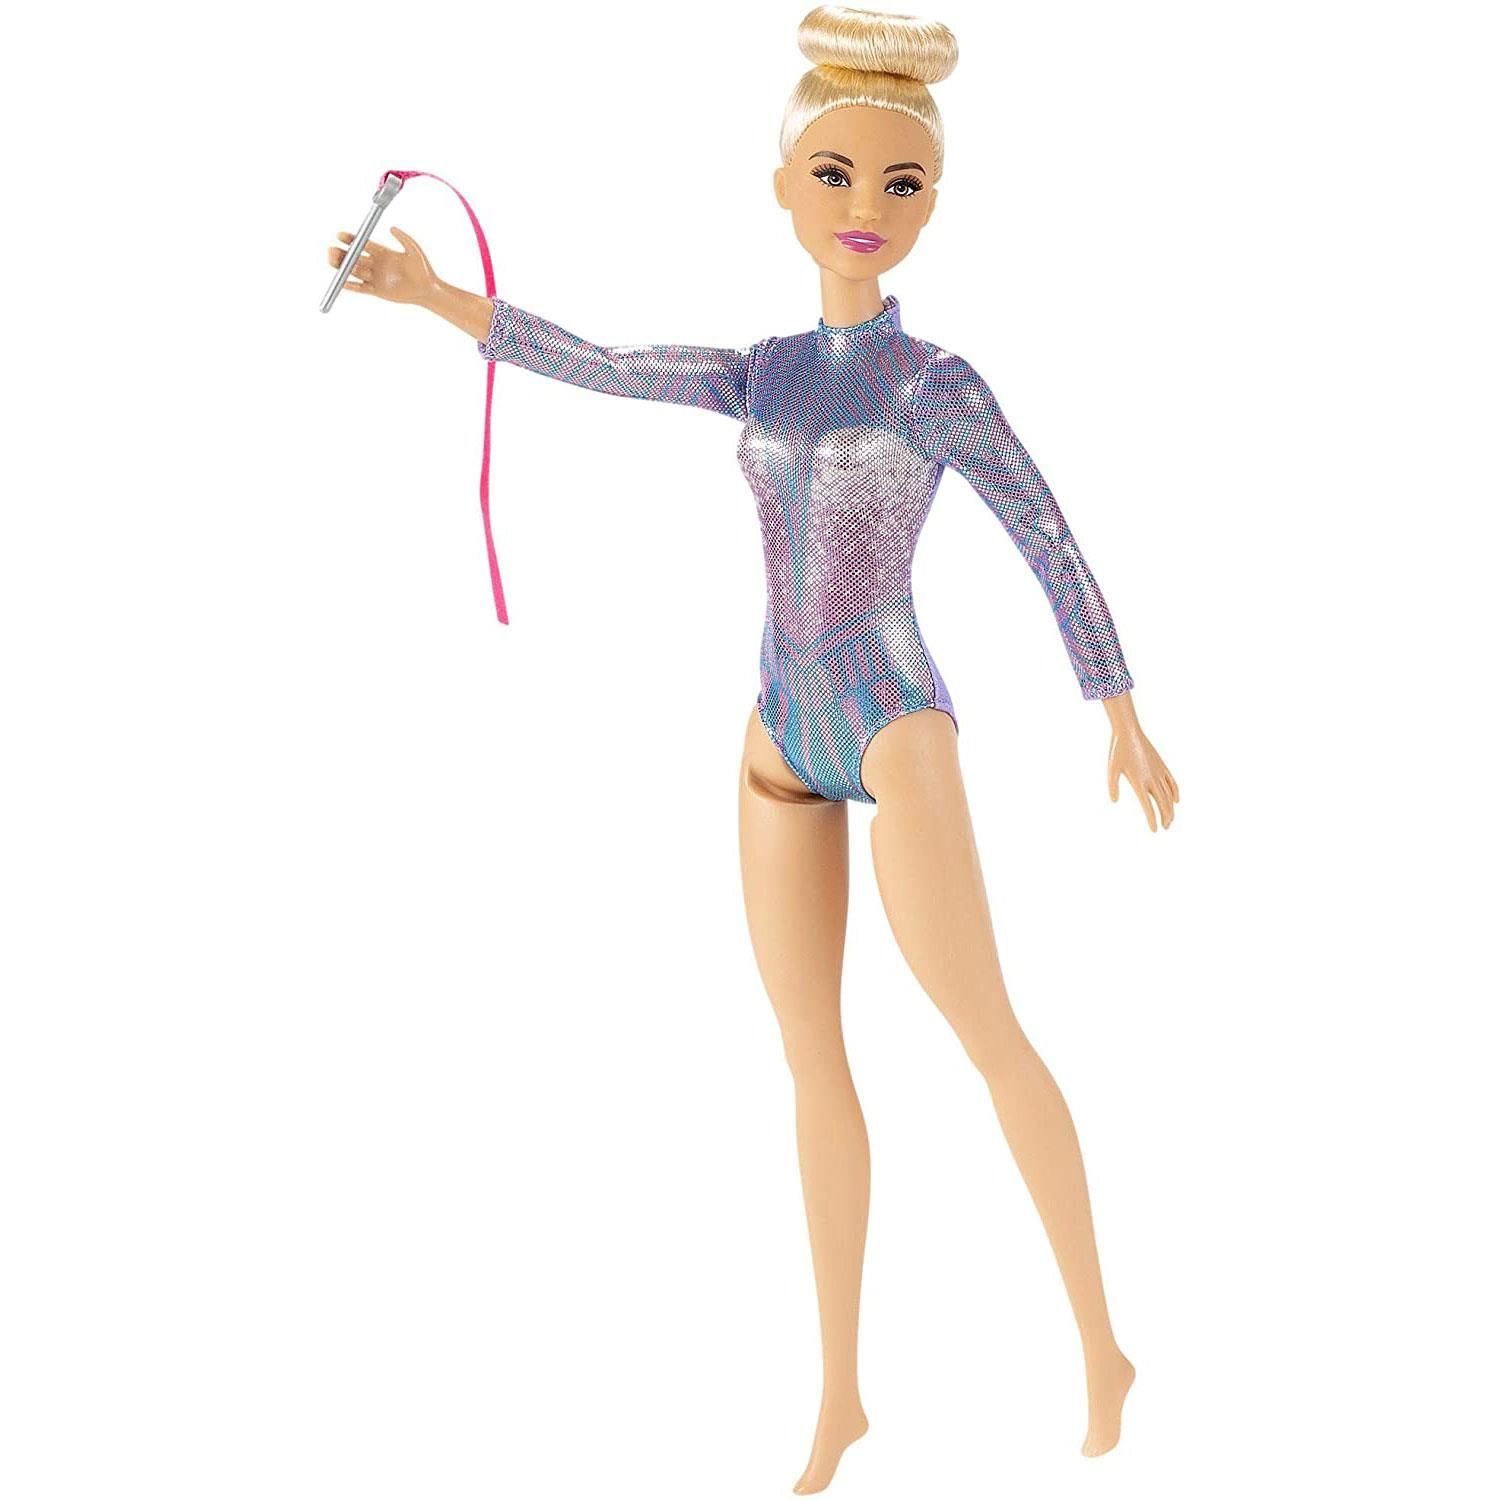 Barbie Fashionable & Fun Loving  Rhythmic Gymnast Doll with Accessories

Explore a world of gymnastic fun with the Barbie rhythmic gymnast doll! When a girl plays with Barbie, she imagines everything she can become, and if you love gymnastics and dance, you can be a rhythmic gymnast! The Barbie rhythmic gymnast doll (12-in/30.40-cm) wears a colourful metallic leotard and has a cute bun updo. She comes with two clubs and a ribbon she can hold for performing her gymnast moves. Kids will love the endless possibilities for creative expression and storytelling fun. Doll cannot stand alone. Colours and decorations may vary. Makes a great gift for ages 3 years old and up.

Features:

Explore gymnastics and dance fun with the Barbie rhythmic gymnast doll and related accessories!
Wearing a colourful metallic leotard and cute bun updo, Barbie rhythmic gymnast doll (12-in/30.40-cm) is ready to perform rhythmic gymnast moves!
Barbie rhythmic gymnast doll can hold the batons and ribbon for exciting, realistic performances and play.
Explore a world of creative storytelling fun with the Barbie rhythmic gymnast doll!
Makes a great gift for kids 3 years old and up, especially those interested in rhythmic gymnastics, dance and fitness!


Specifications:

Toy Type: Barbie Rhythmic Gymnast Doll
Material: Abs Material
Colour: Multicolour

Box Contains:

1x Barbie rhythmic gymnast doll
2x Batons
2x Ribbon